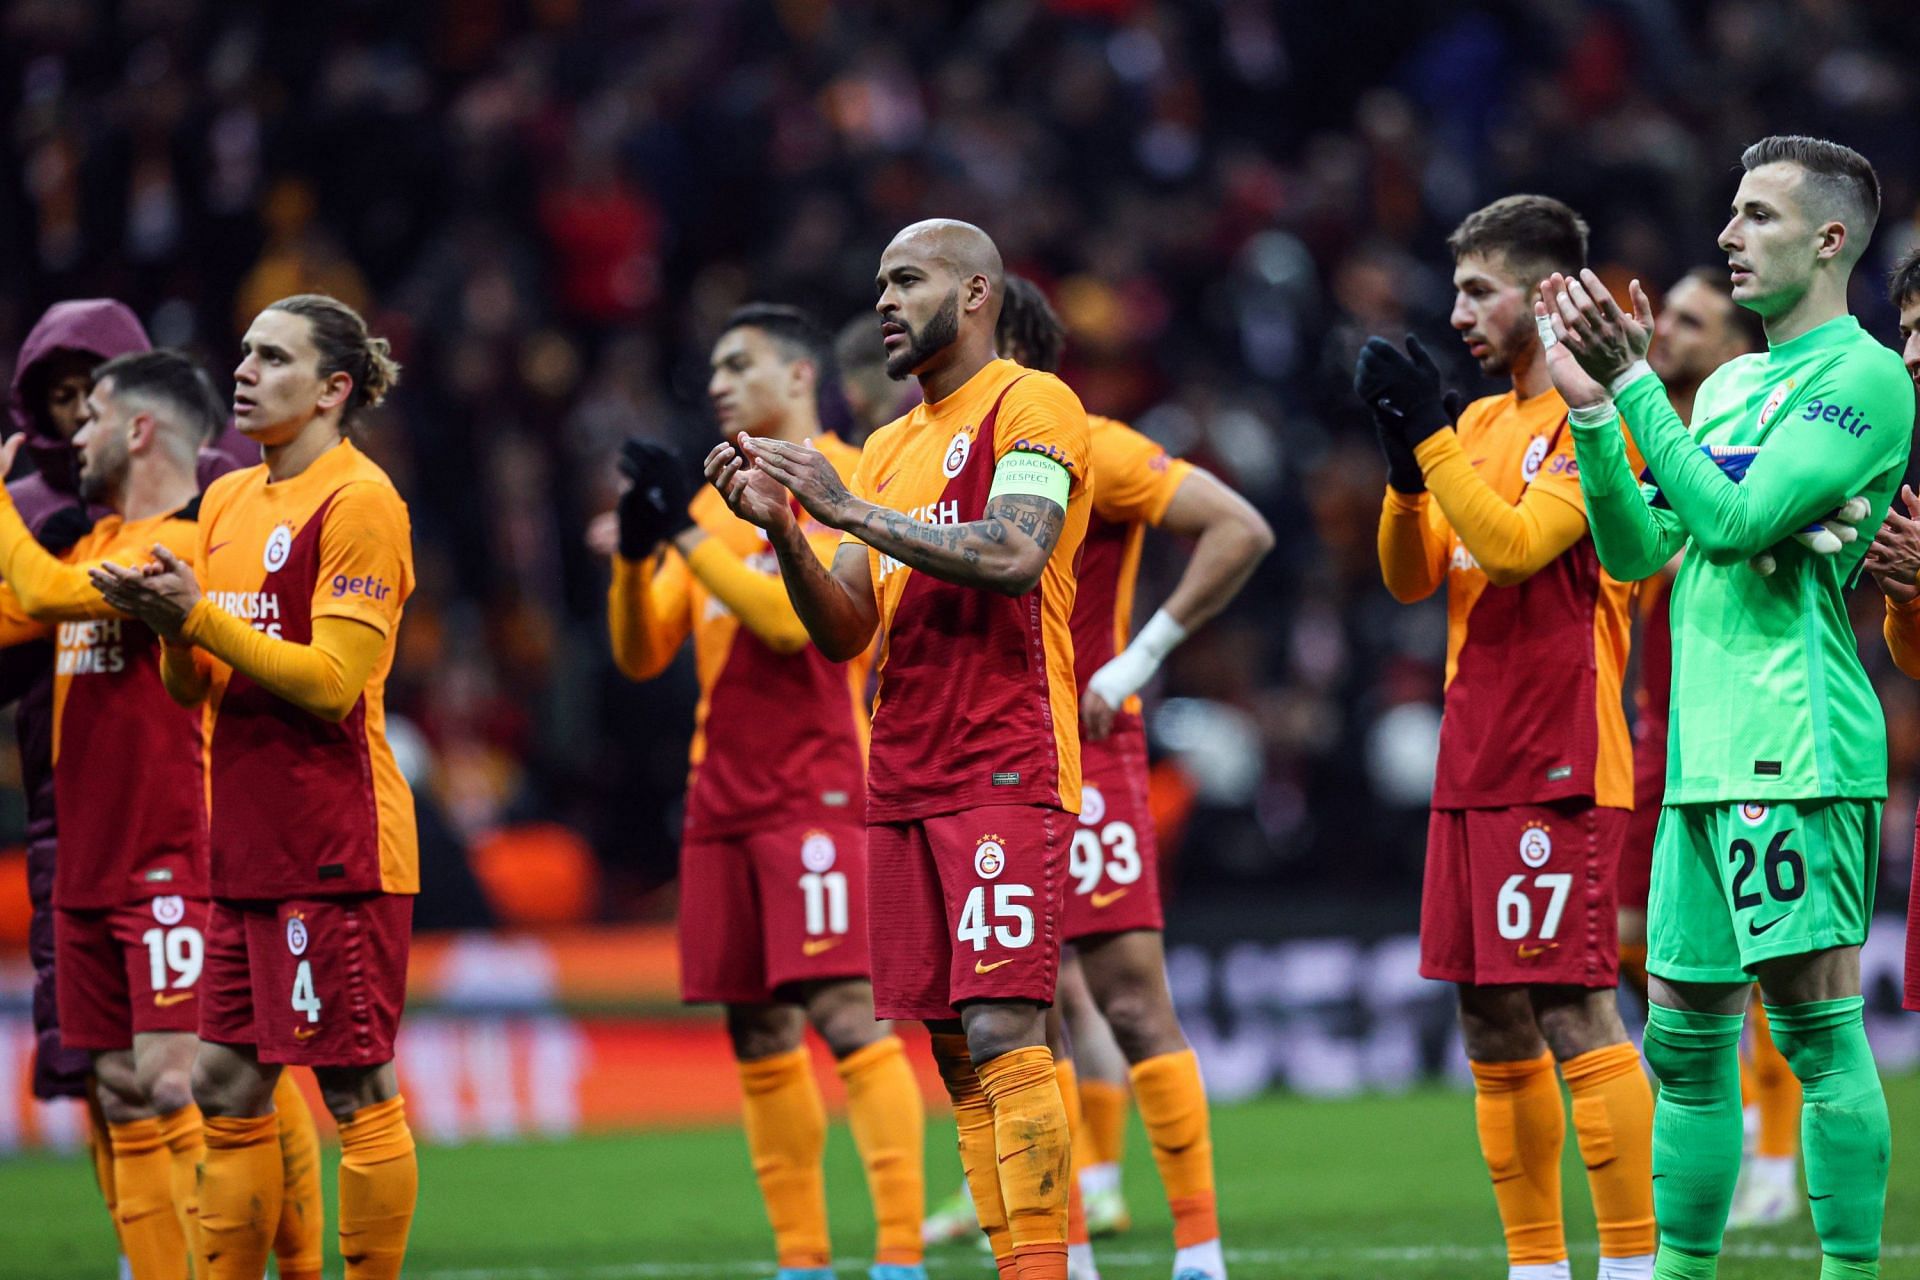 Galatasaray have been incredibly disappointing this season.